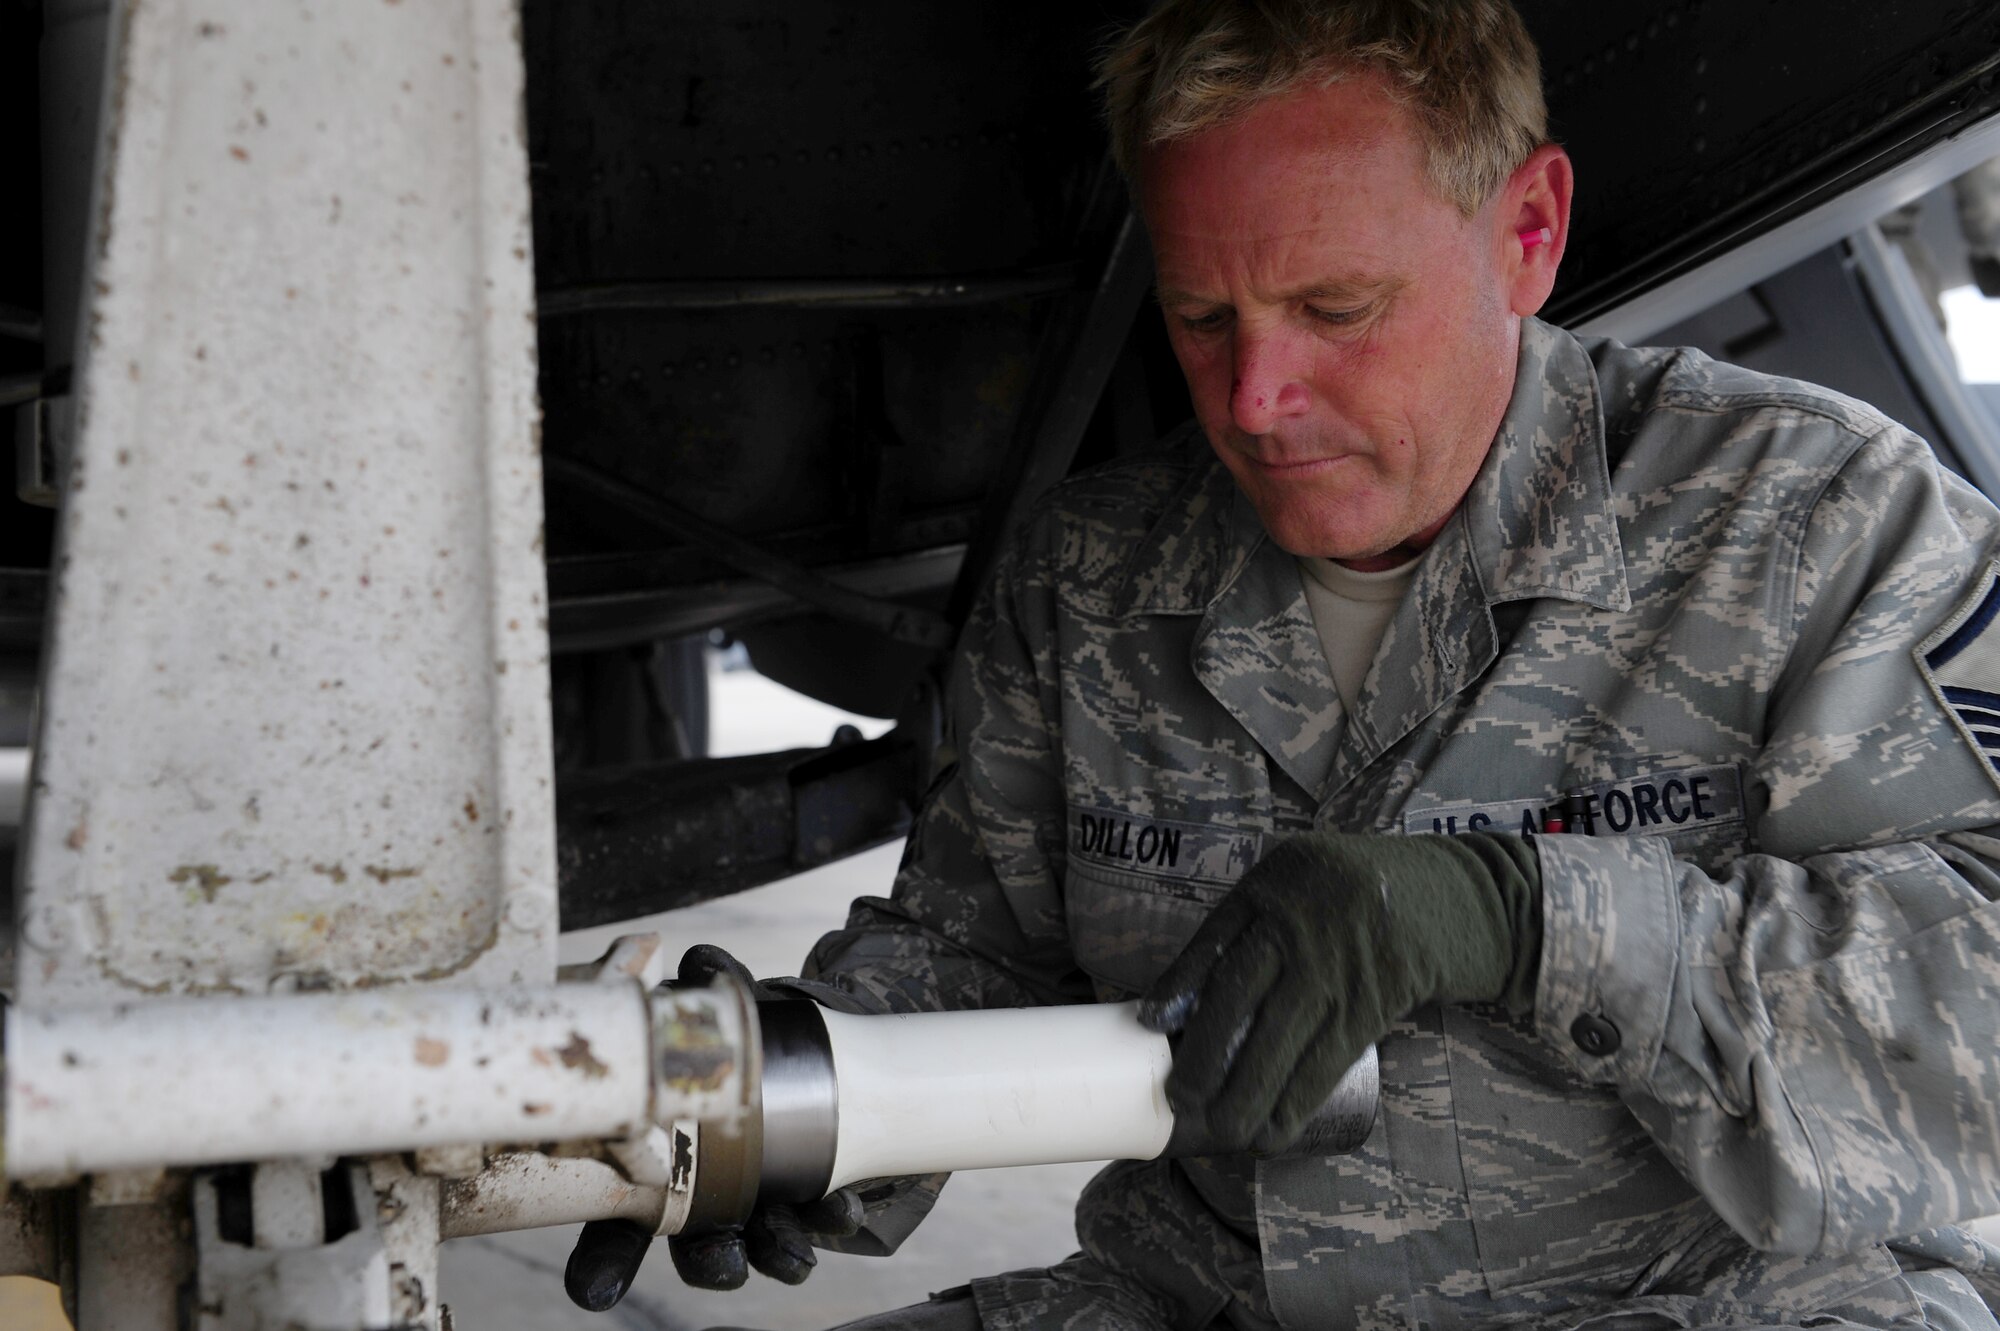 U.S. Air Force Master Sgt. Jeff Dillon, 455th Expeditionary Aircraft Maintenance Squadron crew chief, applies grease to the axel a C-130 Hercules nose landing gear assembly during a tire change procedure at Bagram Airfield, Afghanistan, April 9, 2011. Dillon is deployed from the Delaware Air National Guard’s 166th Aircraft Maintenance Squadron, New Castle, Del., supporting Operation Enduring Freedom. (U.S. Air Force photo/Master Sgt. William Greer)